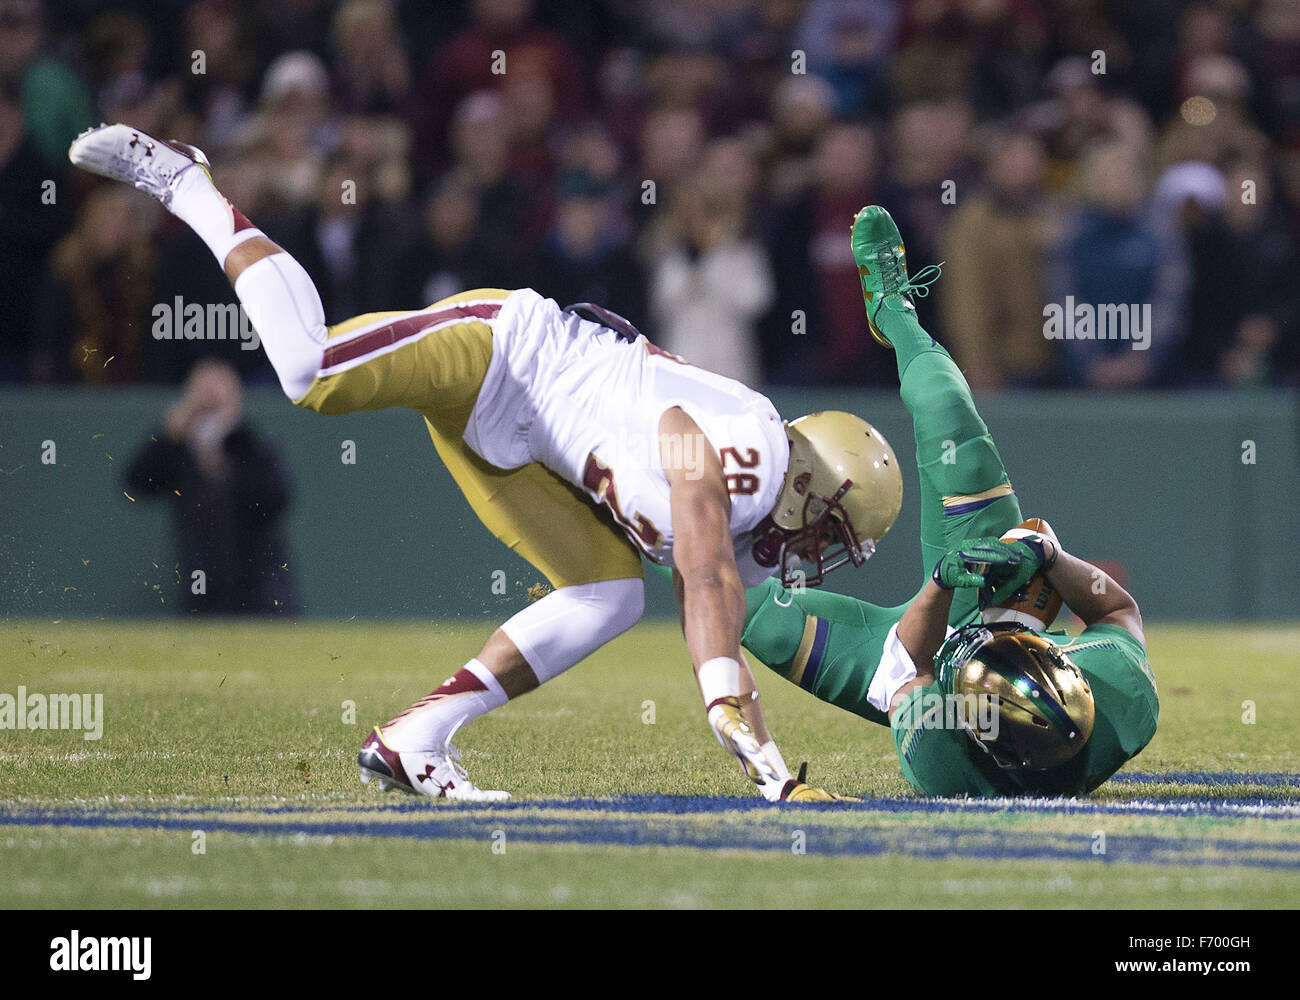 Boston, Massachusetts, USA. 21st Nov, 2015. Boston College linebacker Matt Milano (28) puts the hit on Notre Dame wide receiver Amir Carlisle (3) during NCAA football game action between the Boston College Eagles and the Notre Dame Fighting Irish at Fenway Park in Boston, Massachusetts. Notre Dame defeated Boston College 19-16. John Mersits/CSM/Alamy Live News Credit:  Cal Sport Media/Alamy Live News Stock Photo